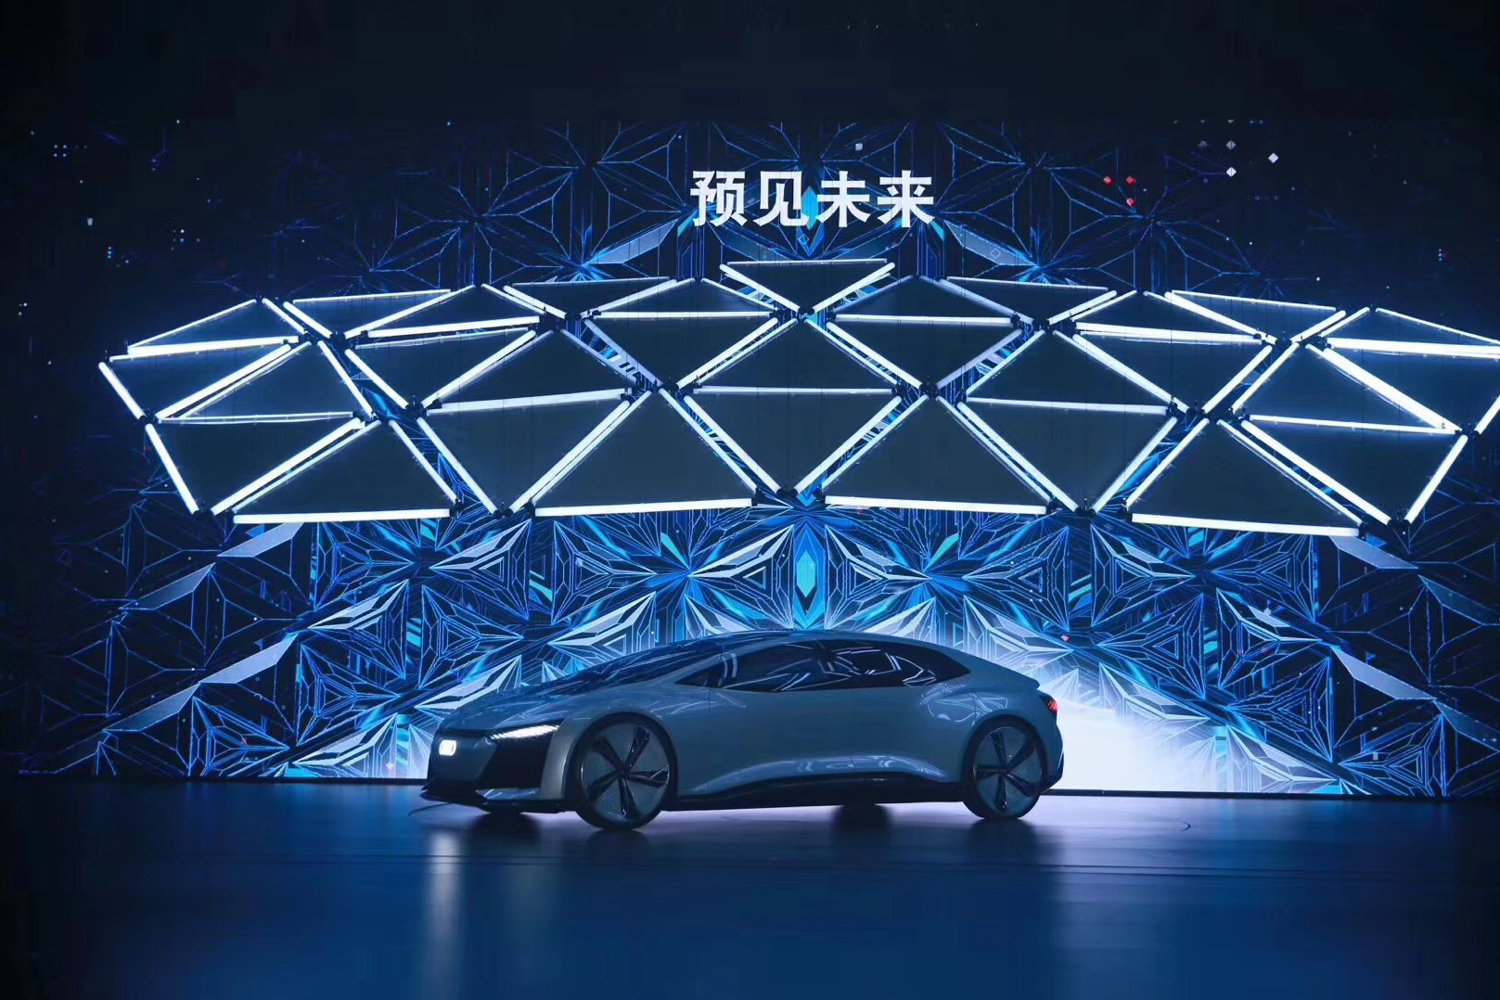 Audi Q8 Announcement Stage LED Screen